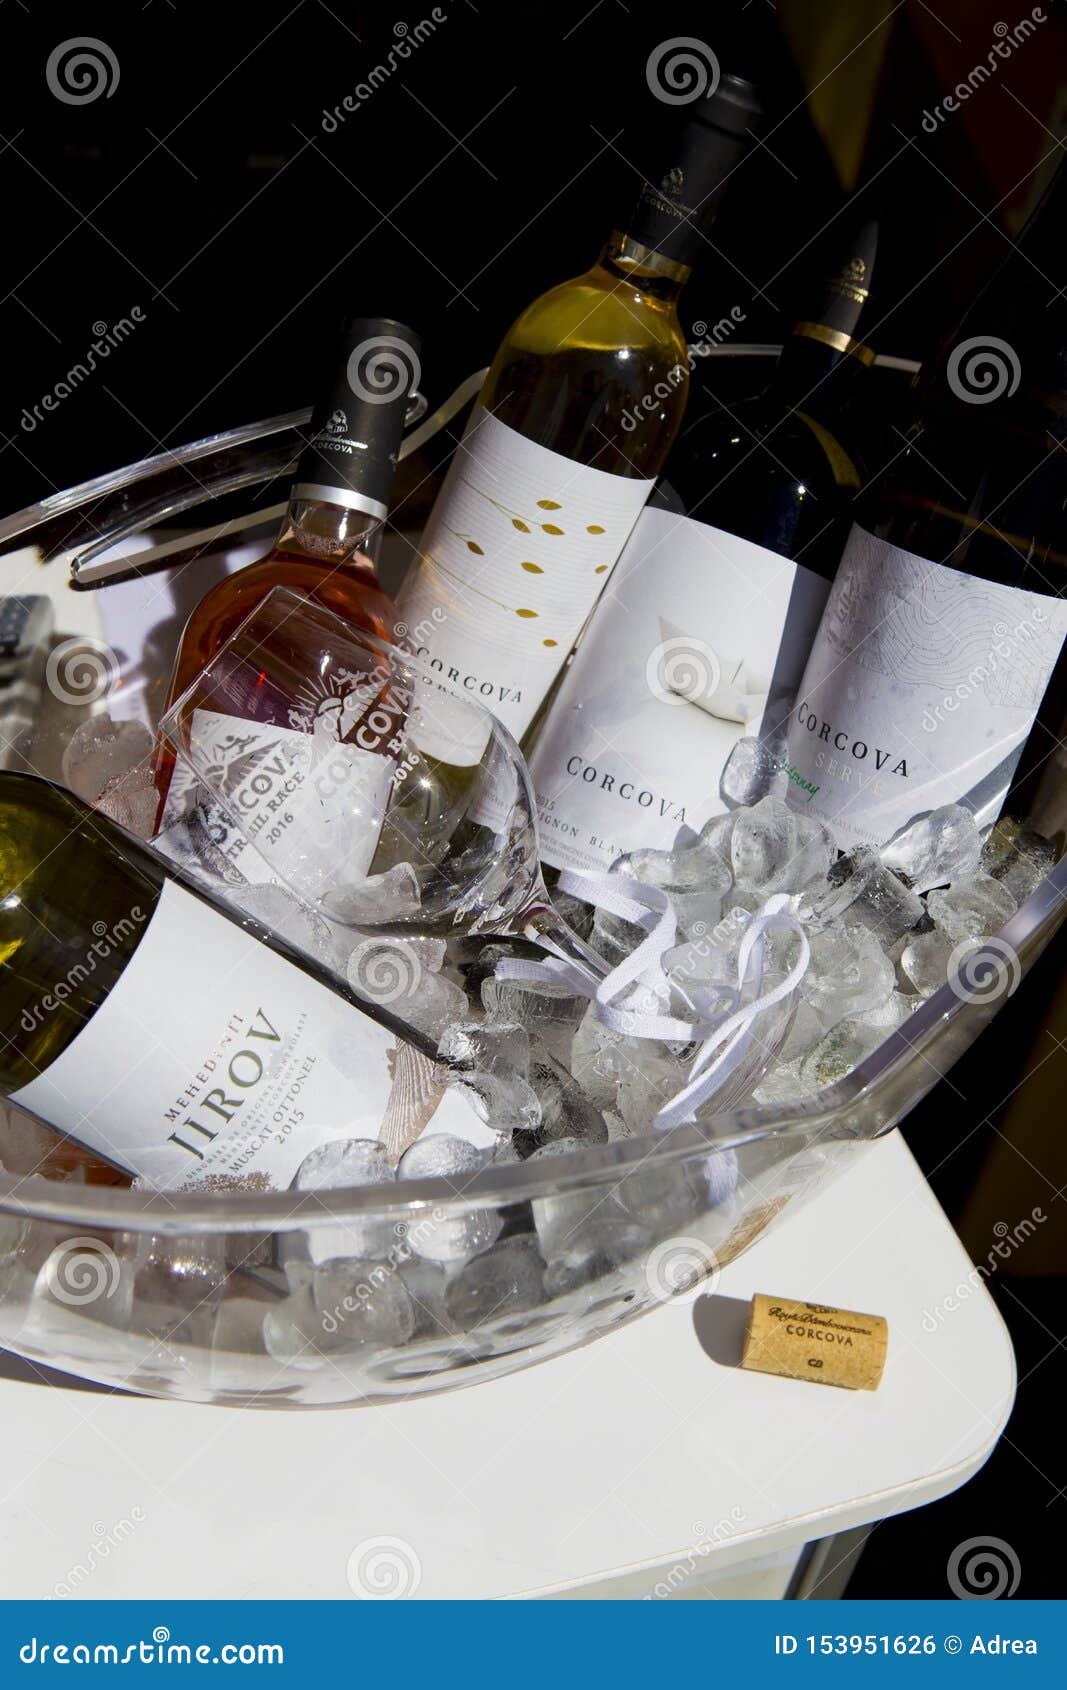 different bottles of wine in a bole with ice